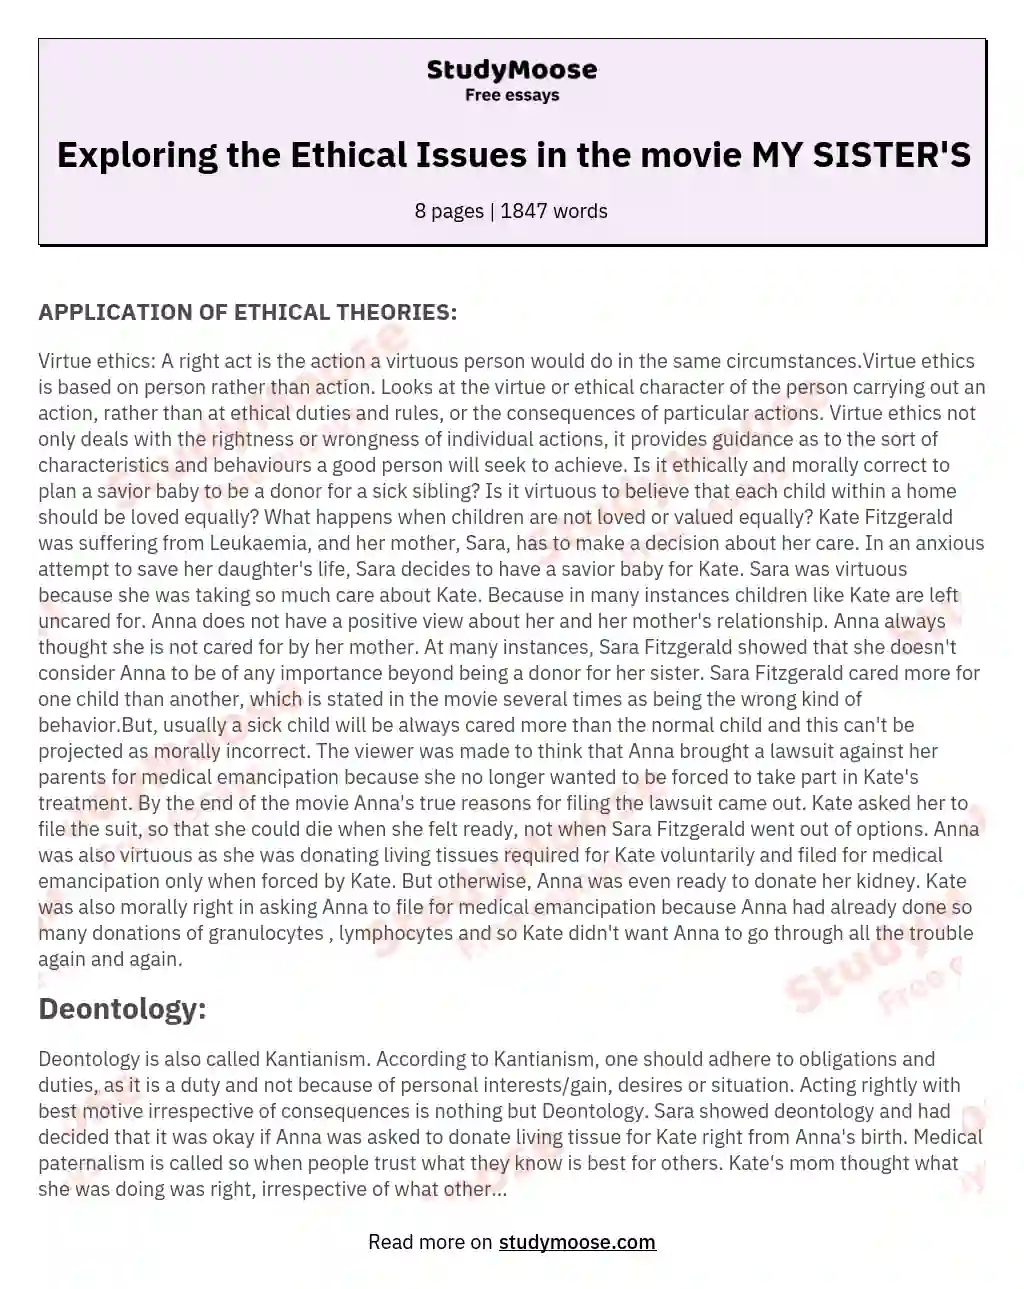 Exploring the Ethical Issues in the movie MY SISTER'S